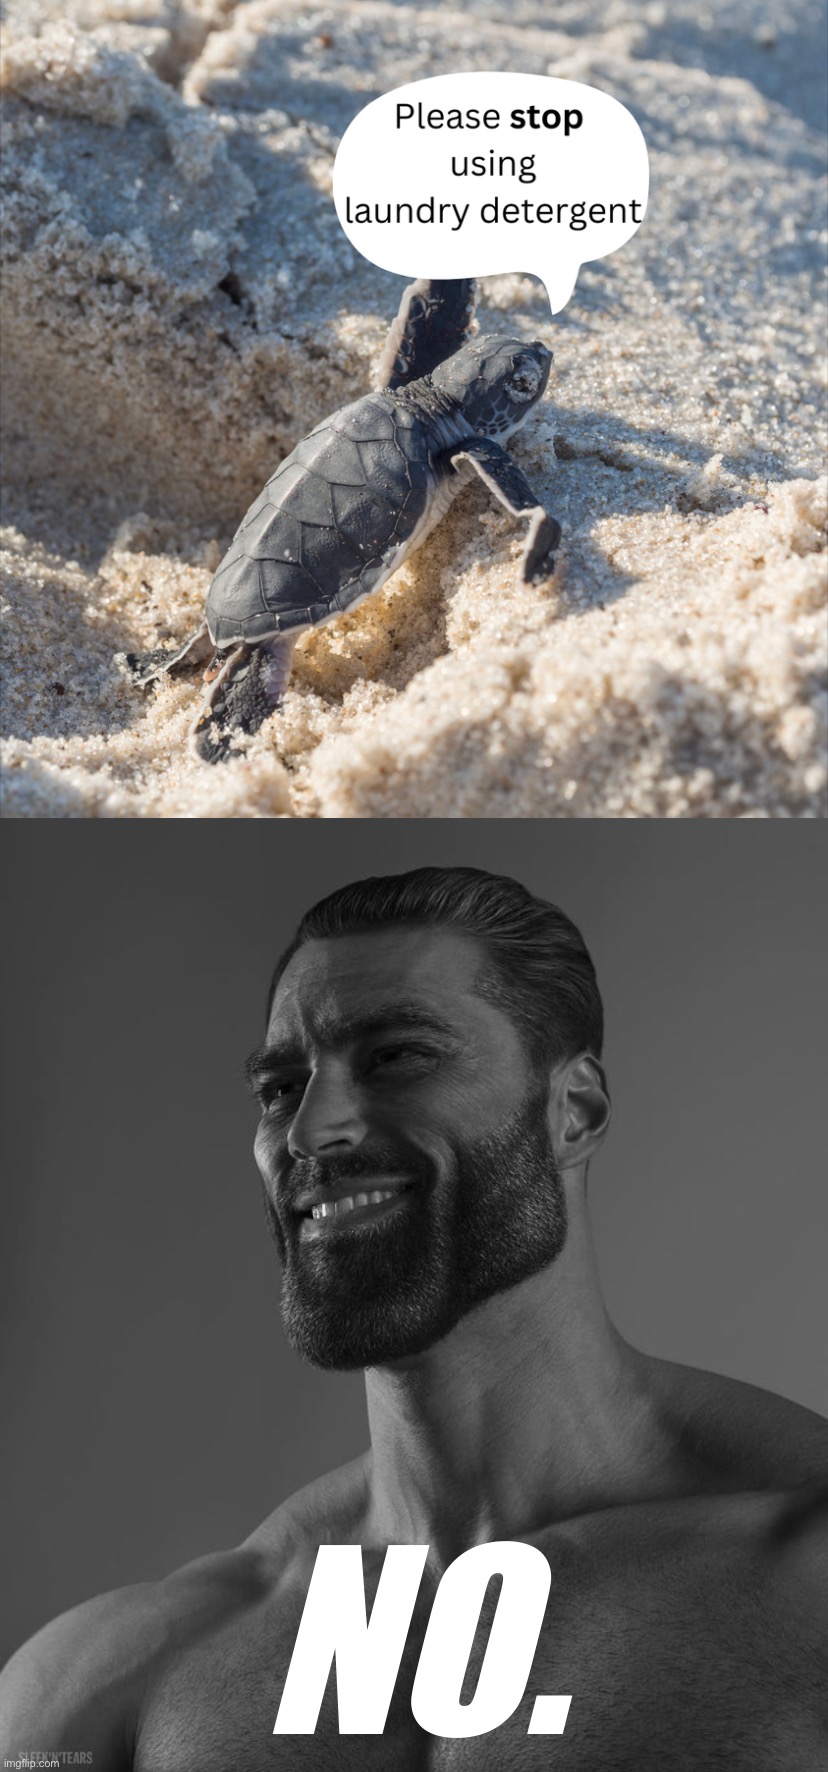 What would a sea turtle know about doing laundry? Especially a baby one? | NO. | image tagged in please stop using laundry detergent,giga chad,laundry,advice | made w/ Imgflip meme maker